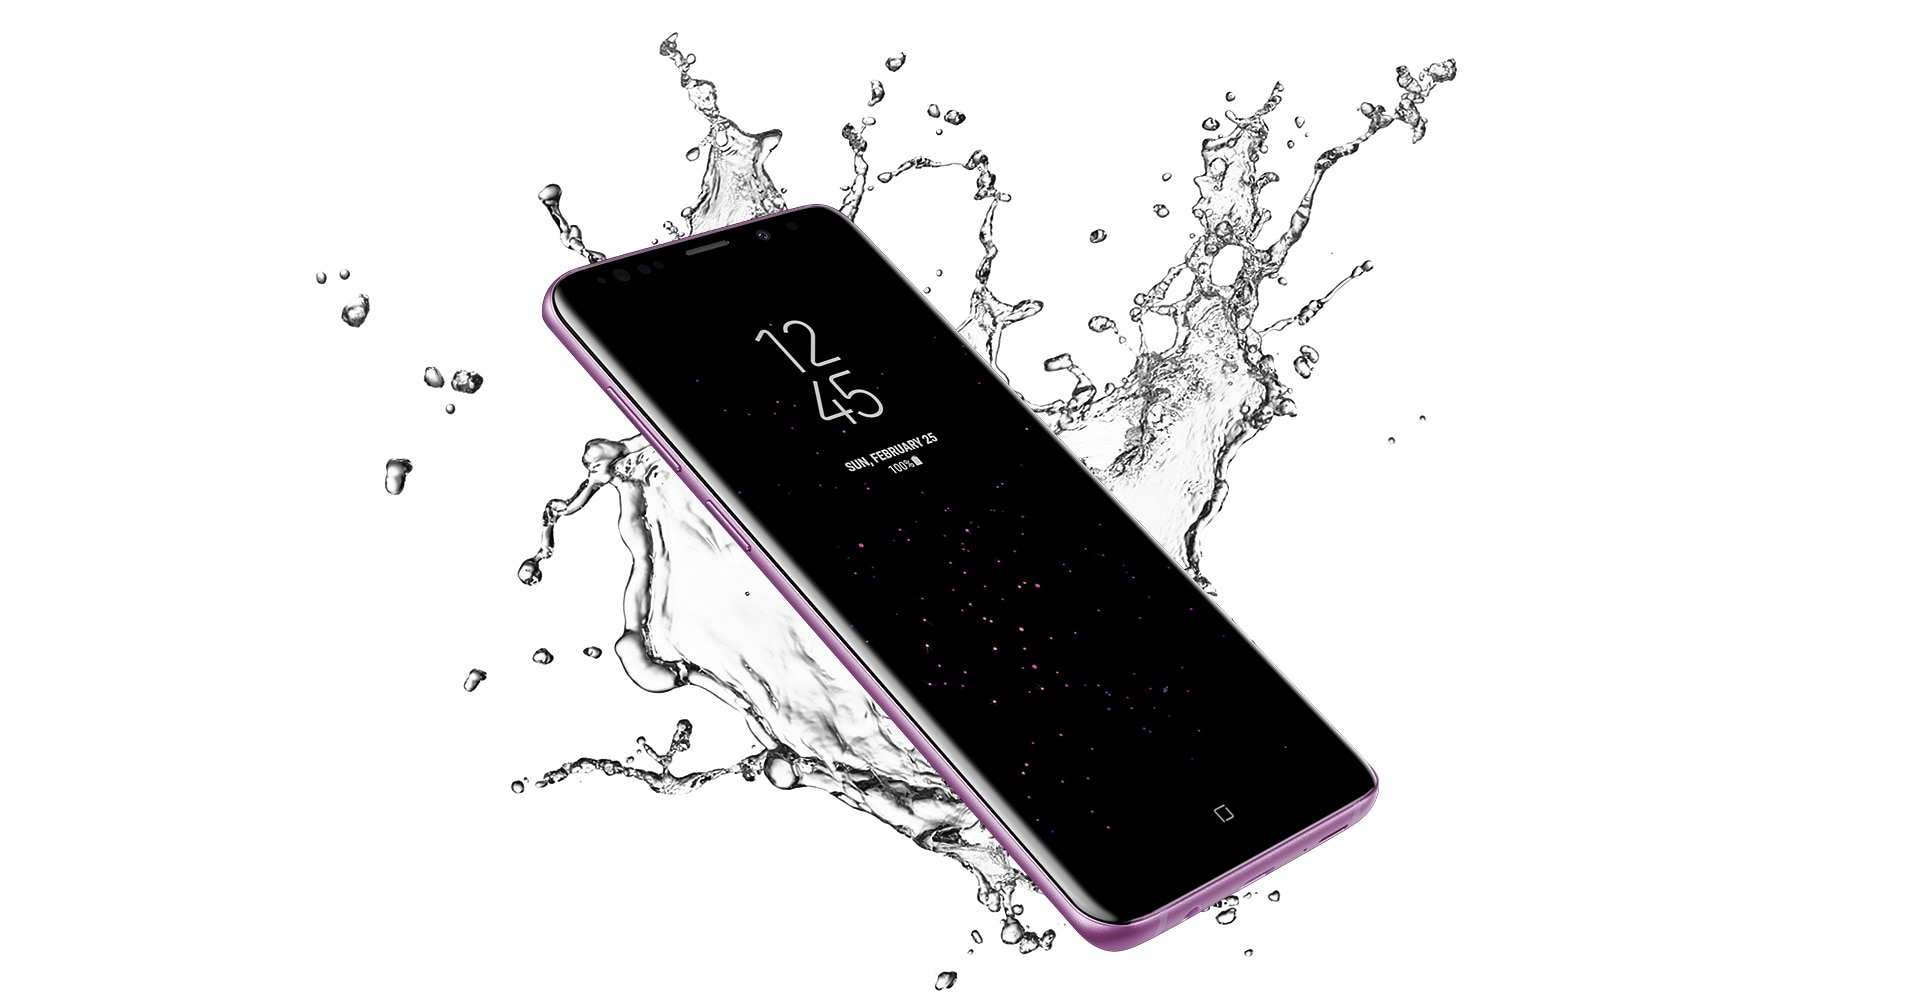 Galaxy S9+ surrounded by splashing water